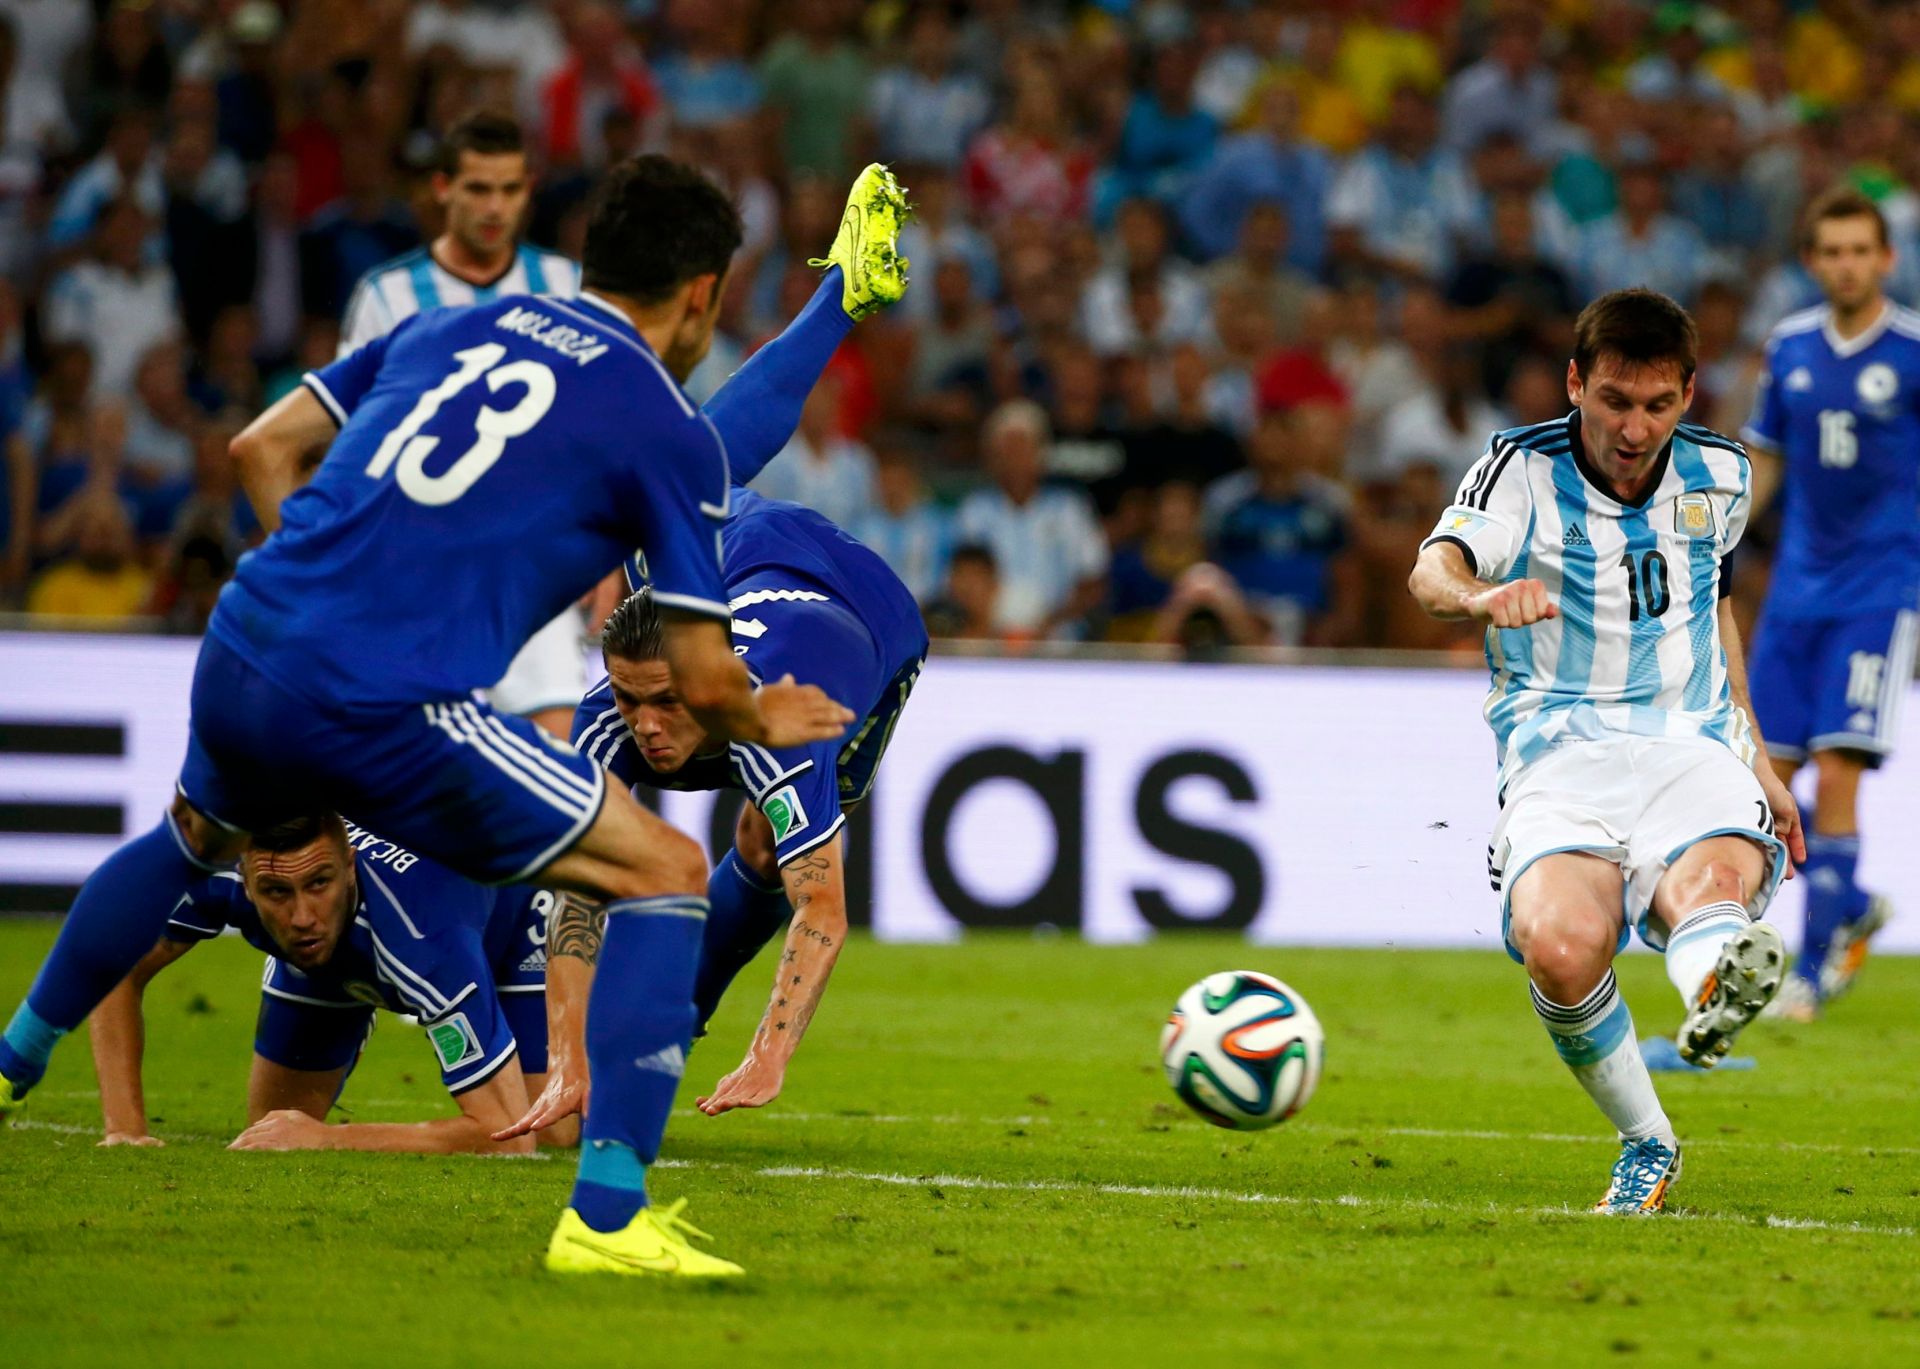 Argentina S Lionel Messi Scores A Goal During The 2014 World Cup Group F Soccer Match Against